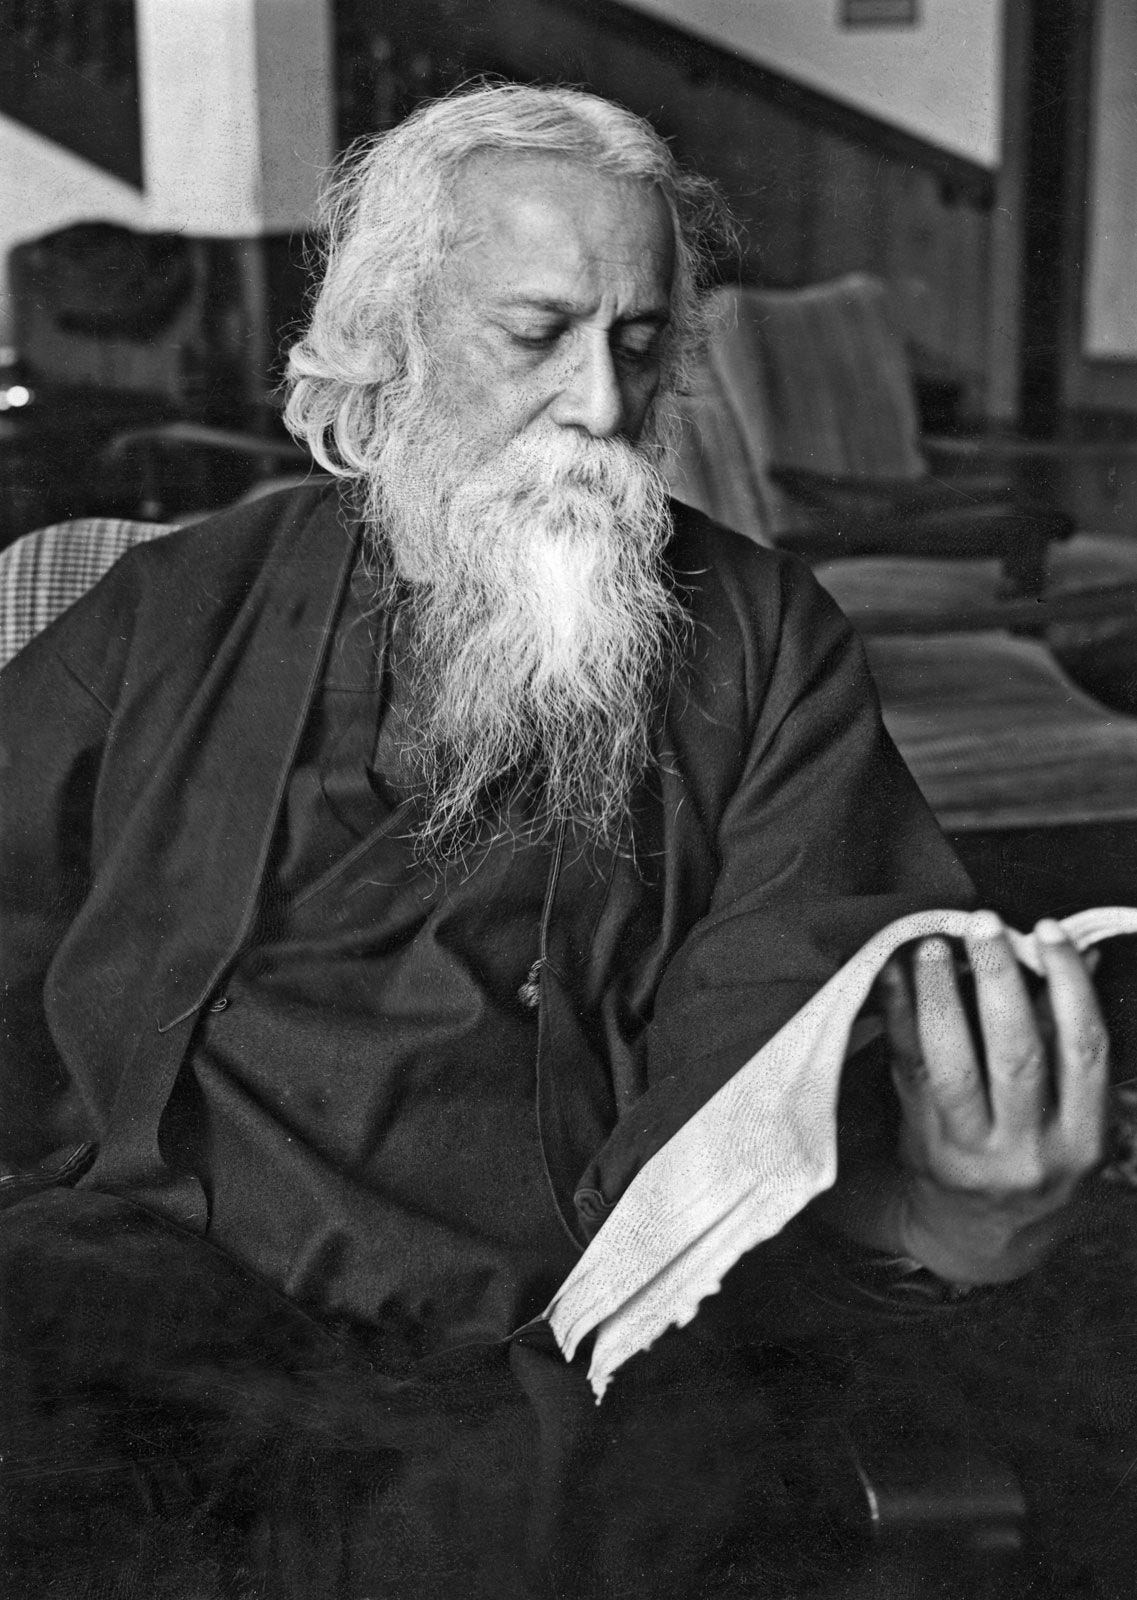 Rabindranath Tagore | Biography, Poems, Short Stories, Nobel Prize, & Facts  | Britannica